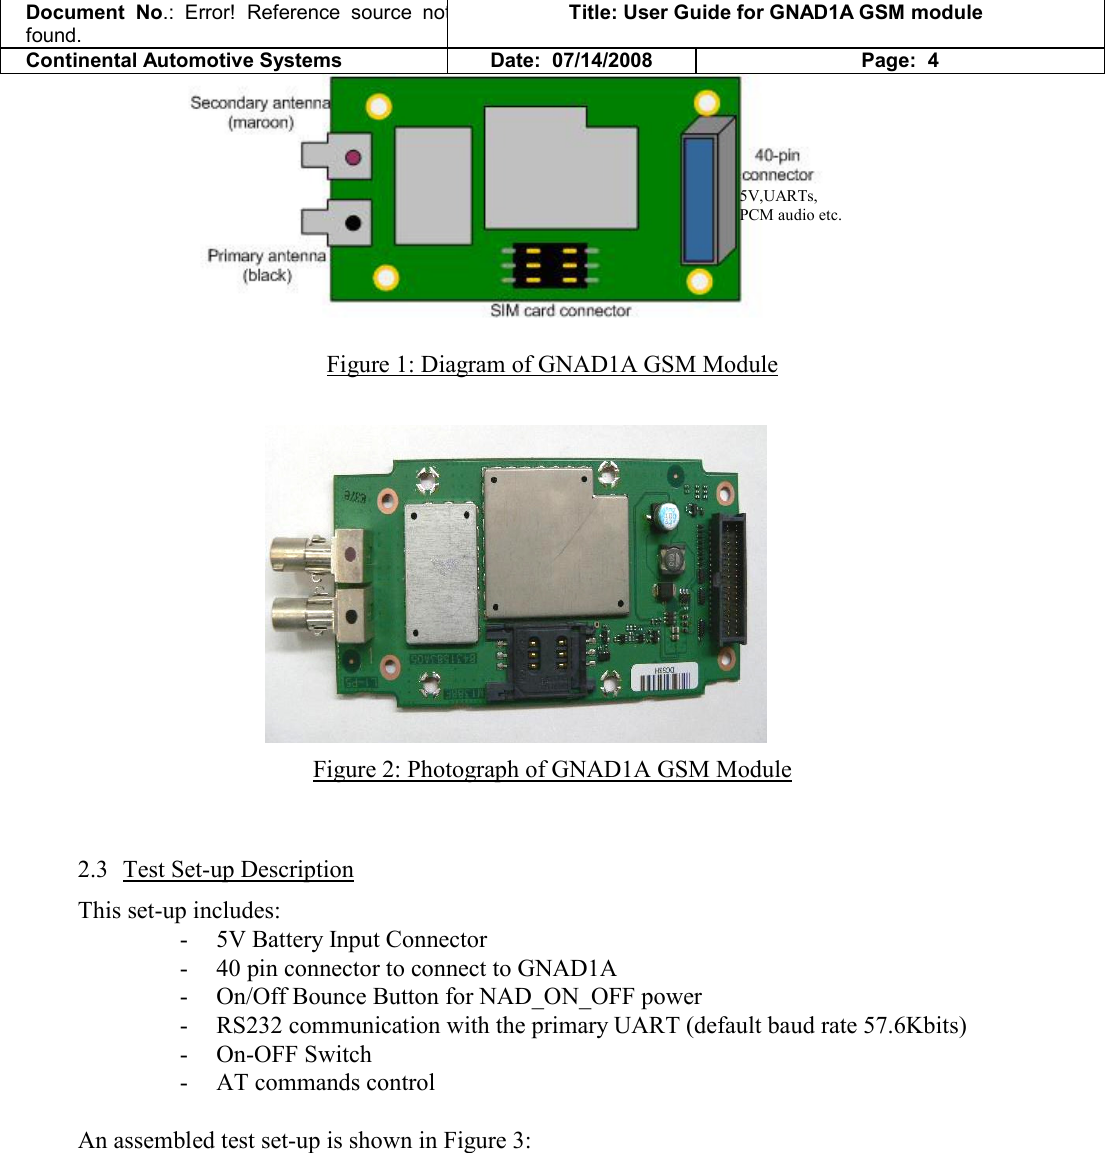 Document  No.: Error!  Reference  source  not found. Title: User Guide for GNAD1A GSM module Continental Automotive Systems Date:  07/14/2008 Page:  4  Figure 1: Diagram of GNAD1A GSM Module   Figure 2: Photograph of GNAD1A GSM Module  2.3 Test Set-up Description This set-up includes: - 5V Battery Input Connector - 40 pin connector to connect to GNAD1A - On/Off Bounce Button for NAD_ON_OFF power - RS232 communication with the primary UART (default baud rate 57.6Kbits) - On-OFF Switch - AT commands control  An assembled test set-up is shown in Figure 3:  5V,UARTs, PCM audio etc. 